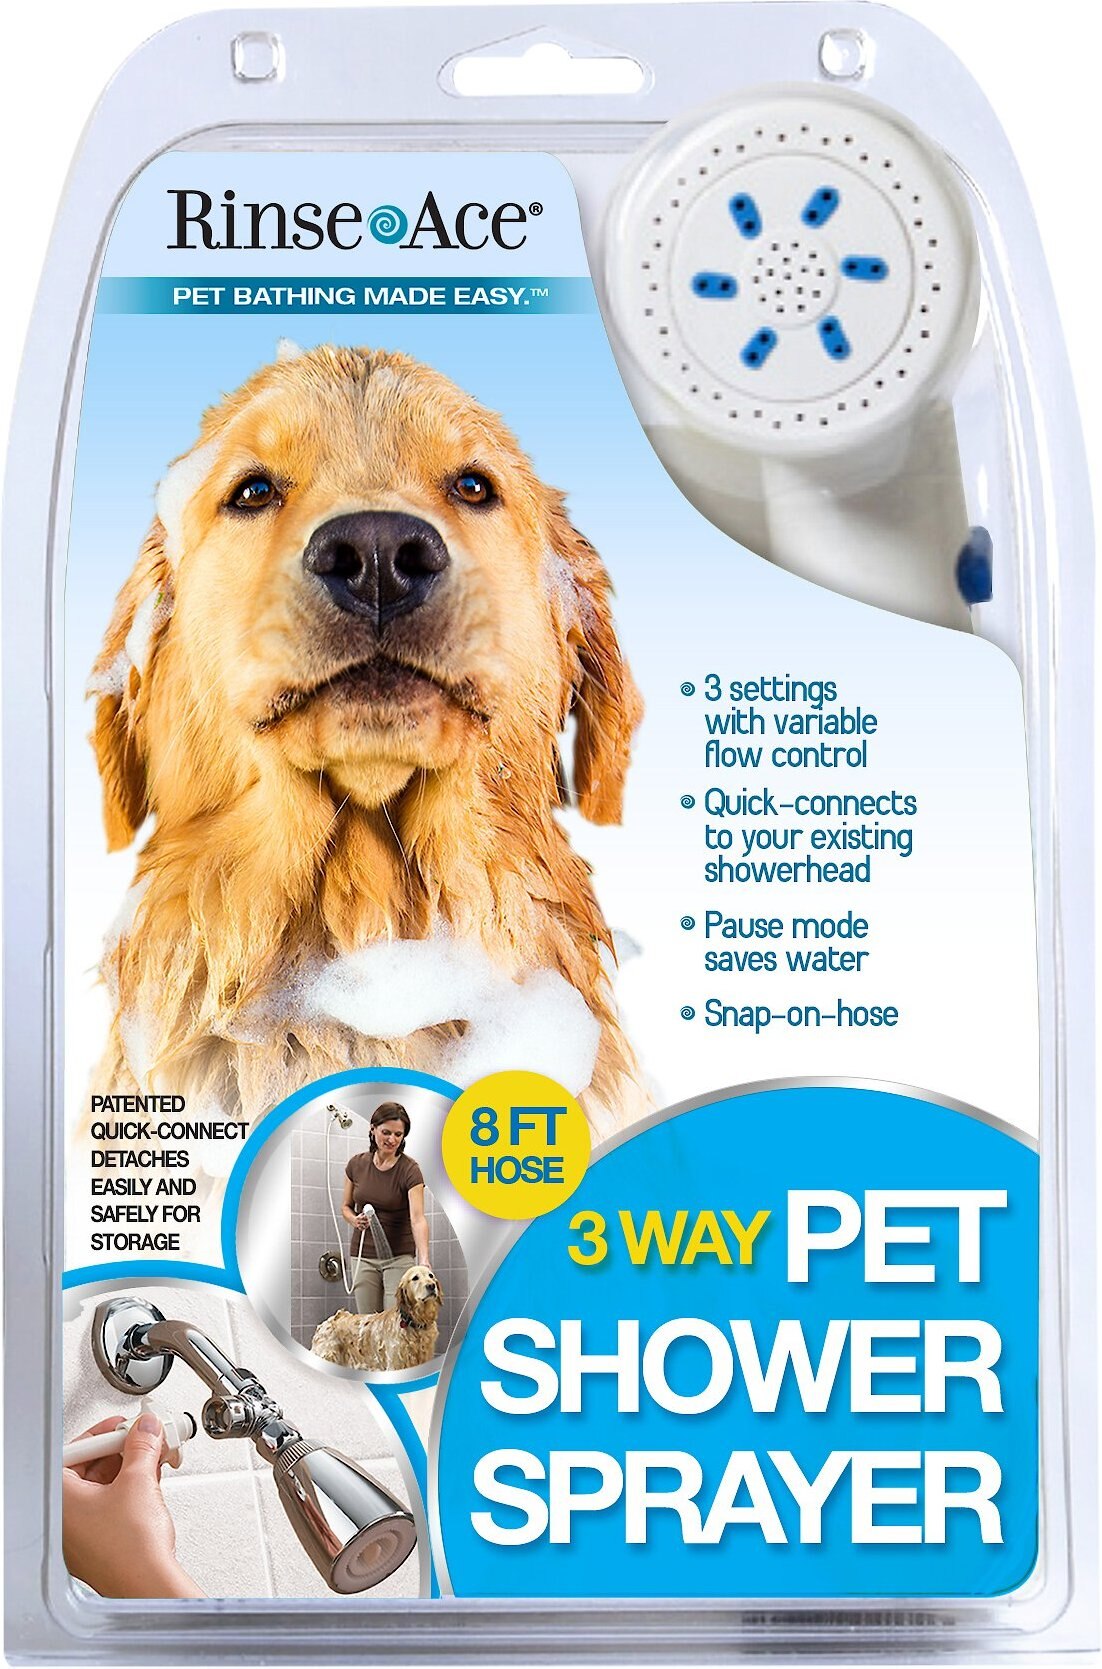 Details about   Handheld Pet Shower Sprayer And Hose For Bath Tub Faucet Dog Bathing Rinser Tool 